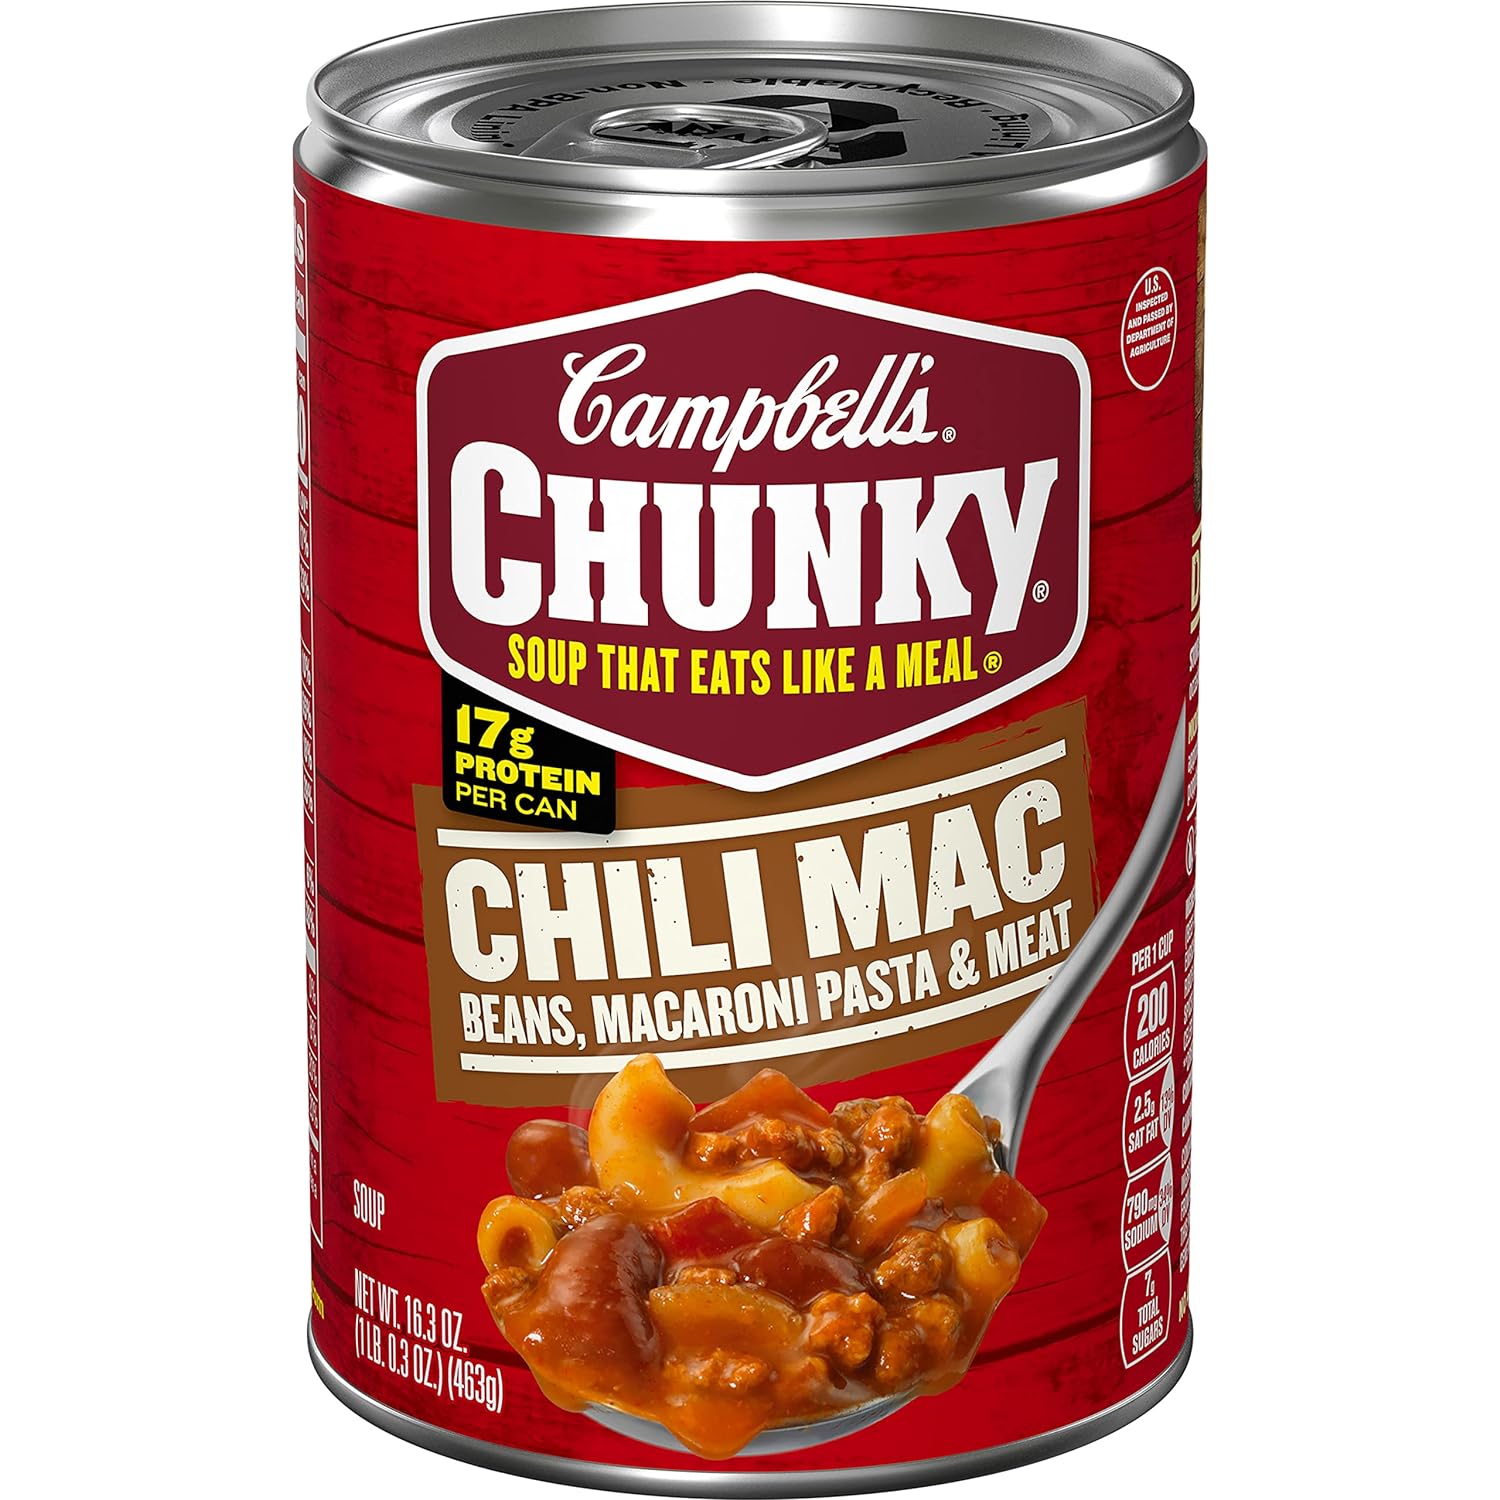 $12.23 Case of 8 Chili Mac Campbell's Chunky Soup 16.3 Oz Cans (Free Ship on orders over $25, or Prime)